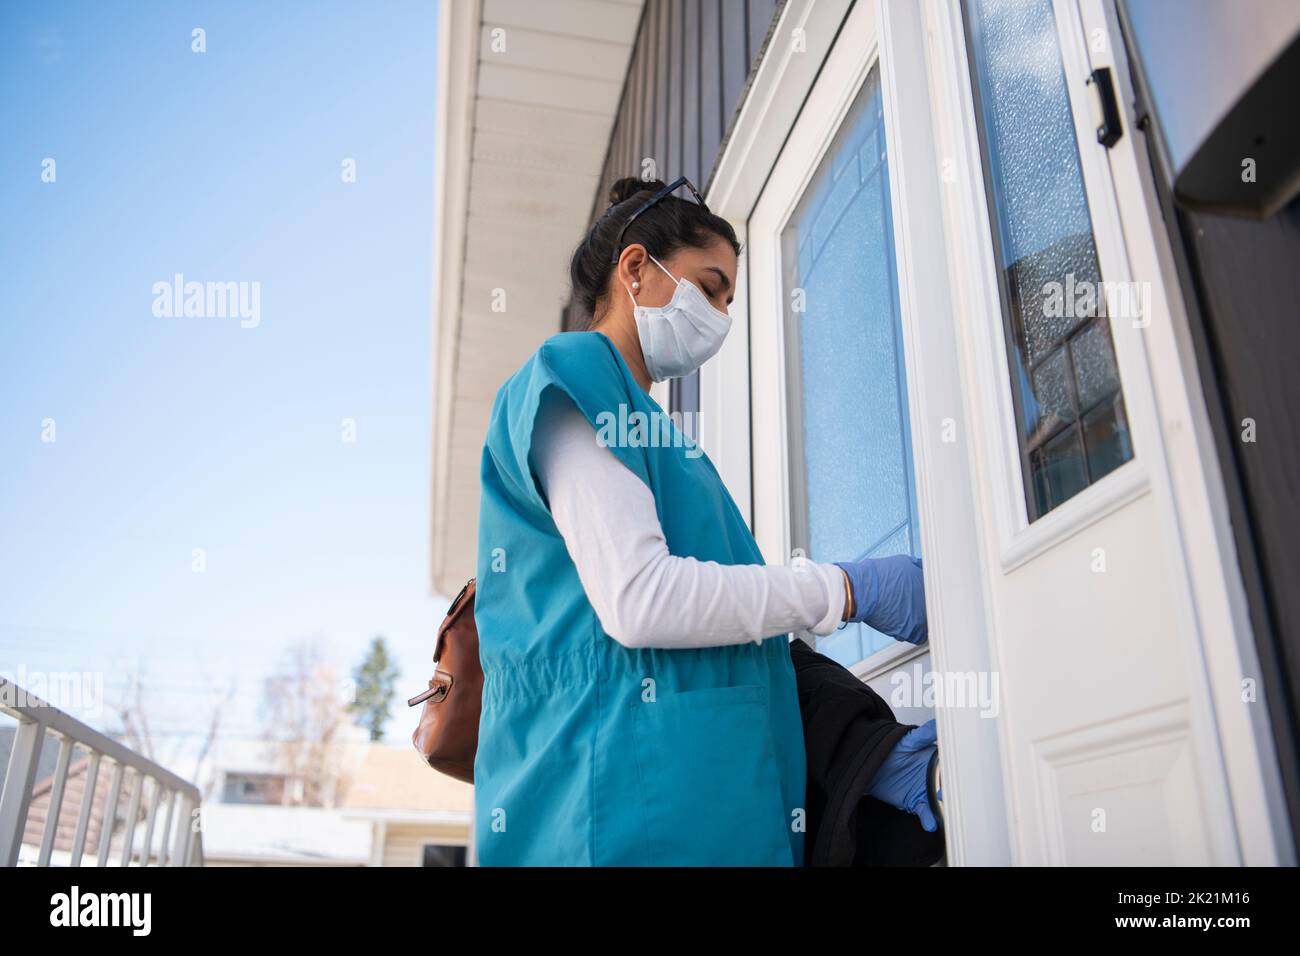 Female nurse in scrubs and face mask locking front door of house Stock Photo